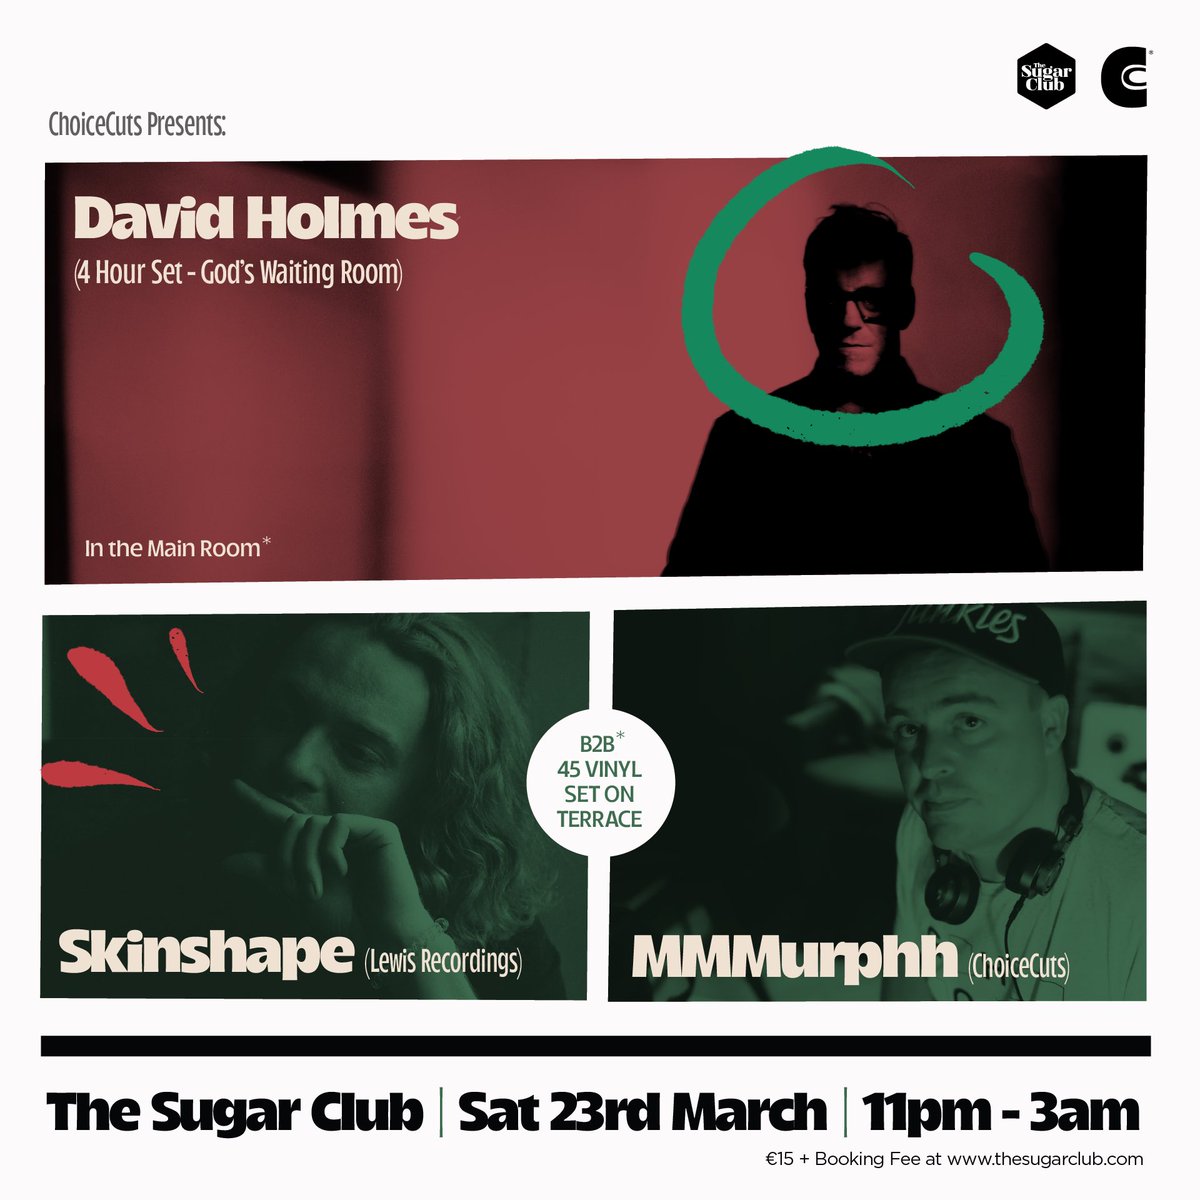 ChoiceCuts presents SkinShape, David Holmes & MMMurphh this 23rd of March for a late party, expect great tunes and good vibes! From Alternative, Electronic, Hip-Hop, Reggae & more. Doors: 11pm Tickets: €15 + Booking Fee bit.ly/CC_DavidHolmes…